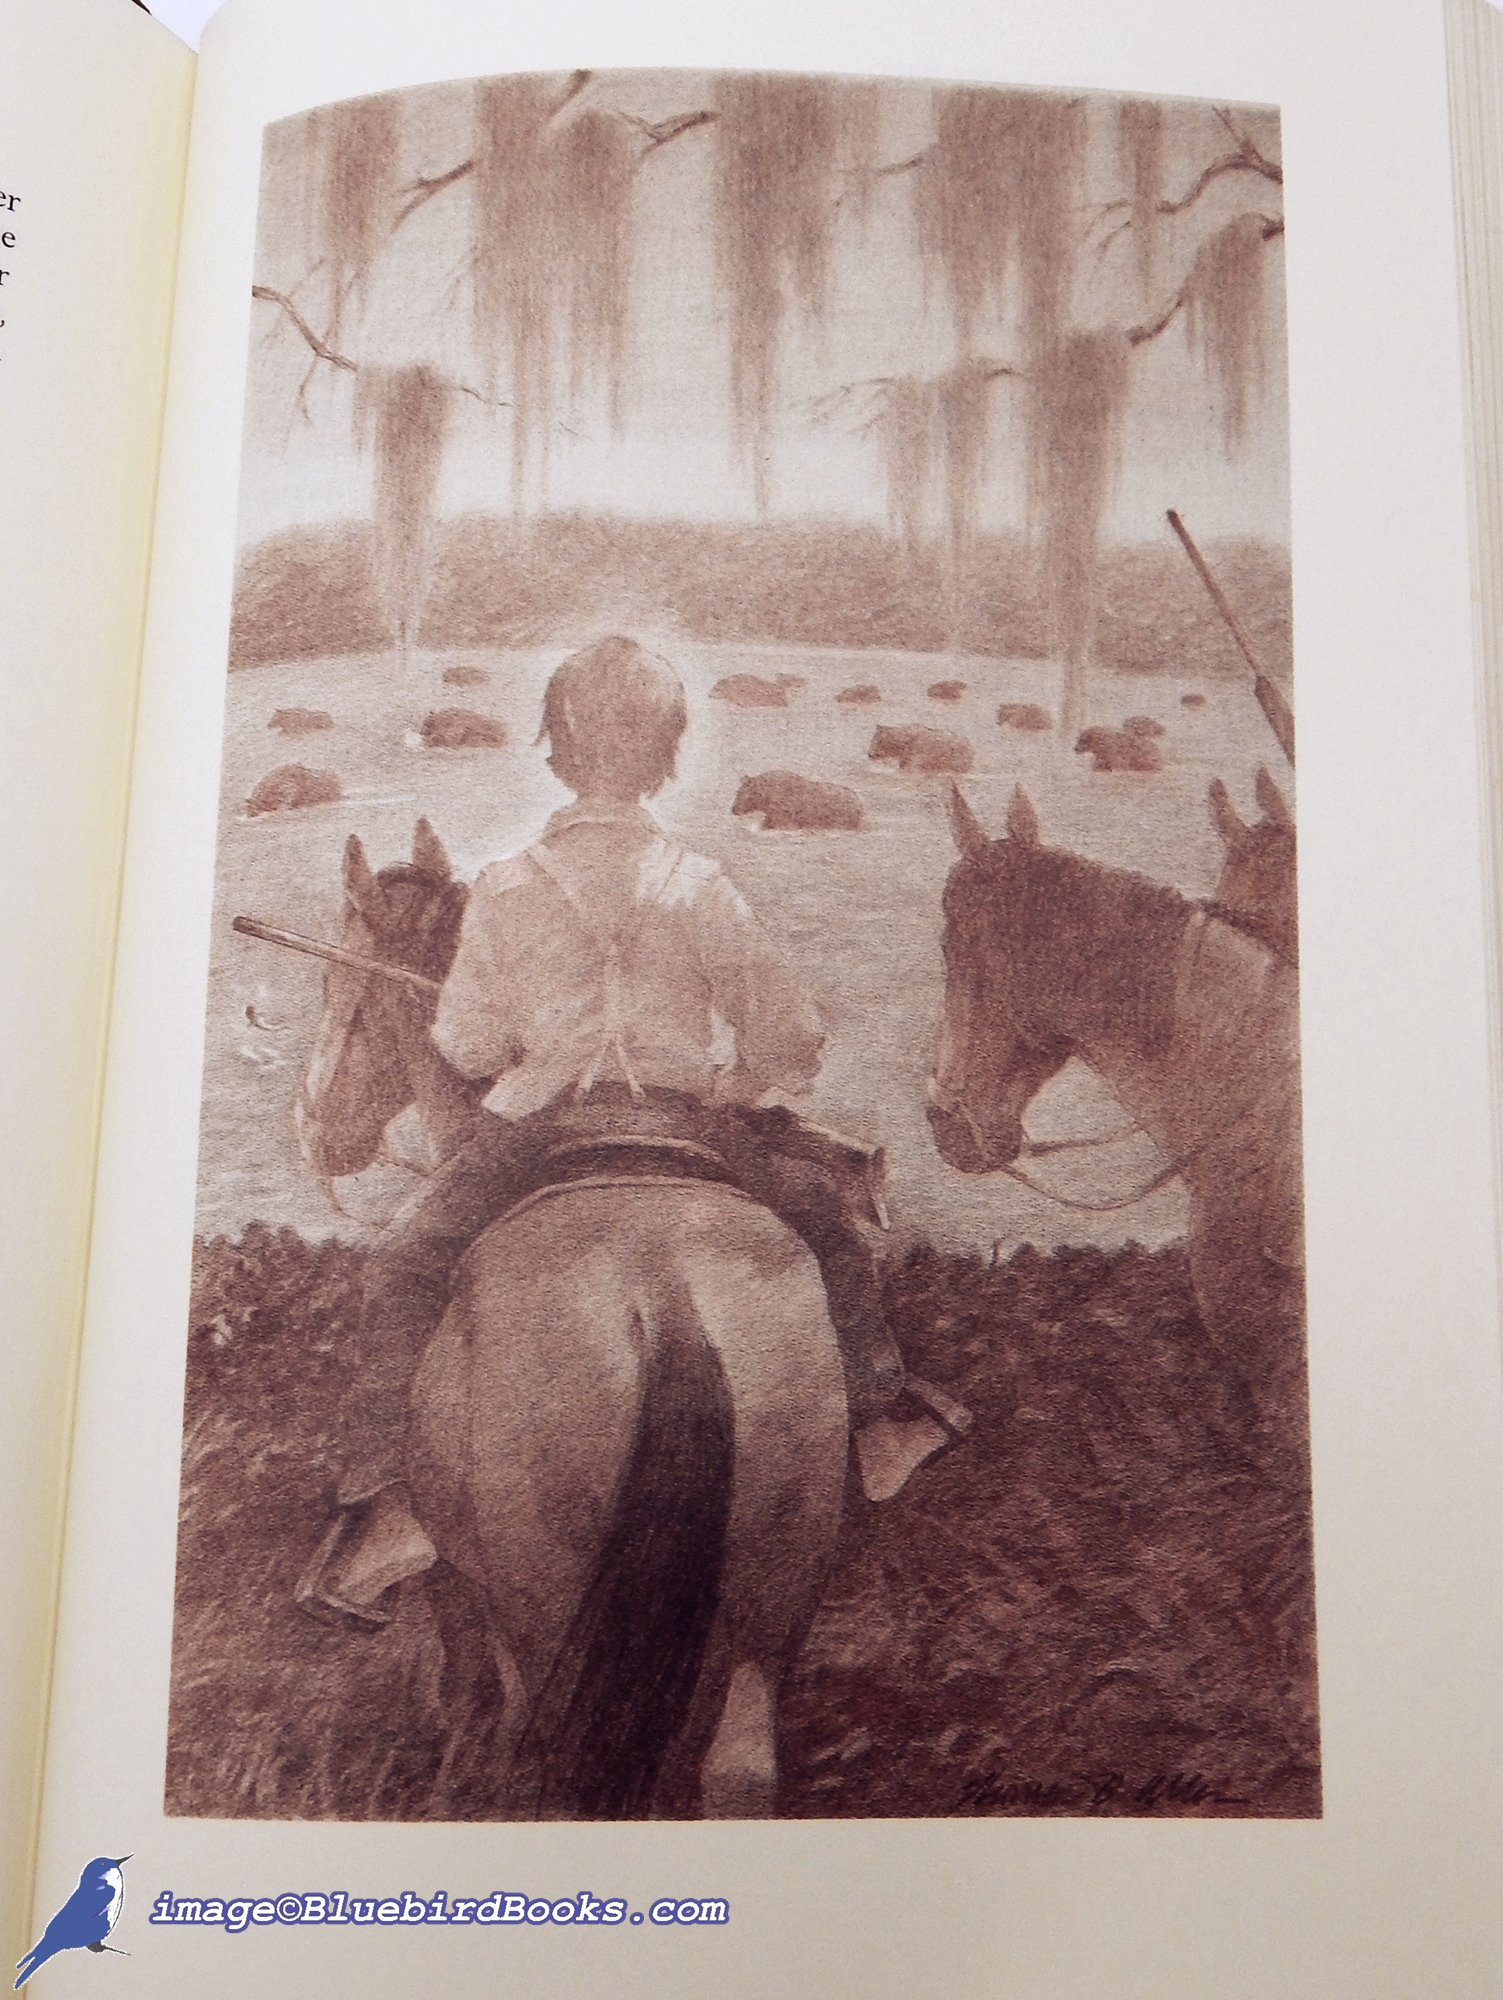 RAWLINGS, MARJORIE KINNAN (AUTHOR); ALLEN, THOMAS B. (ILLUSTRATIONS) - The Yearling (Quarter Leather Franklin Library Edition)